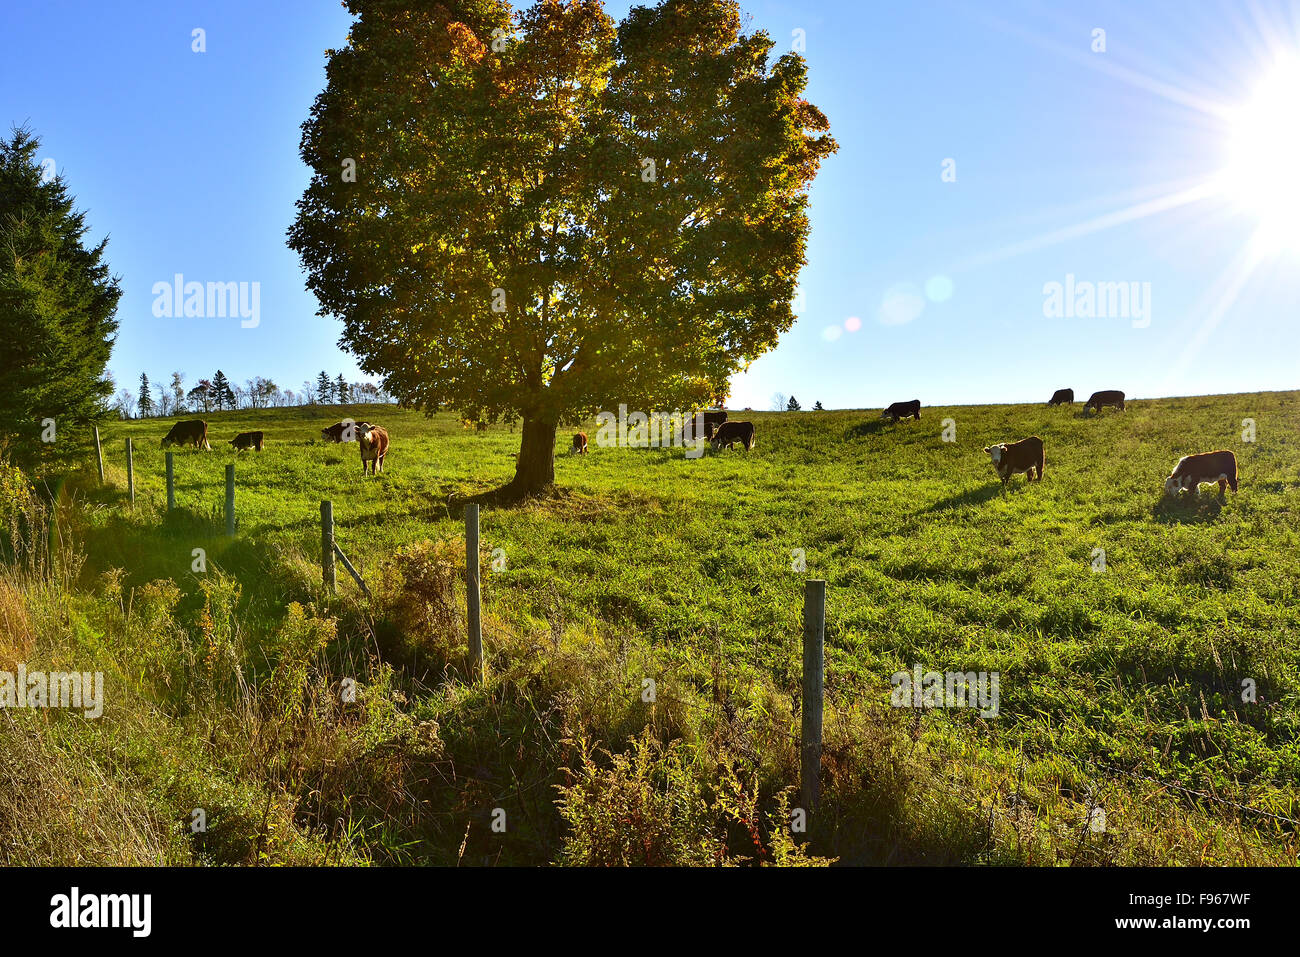 A herd of beef cattle in a lush meadow early morning light on a farm in rural New Brunswick Canada. Stock Photo